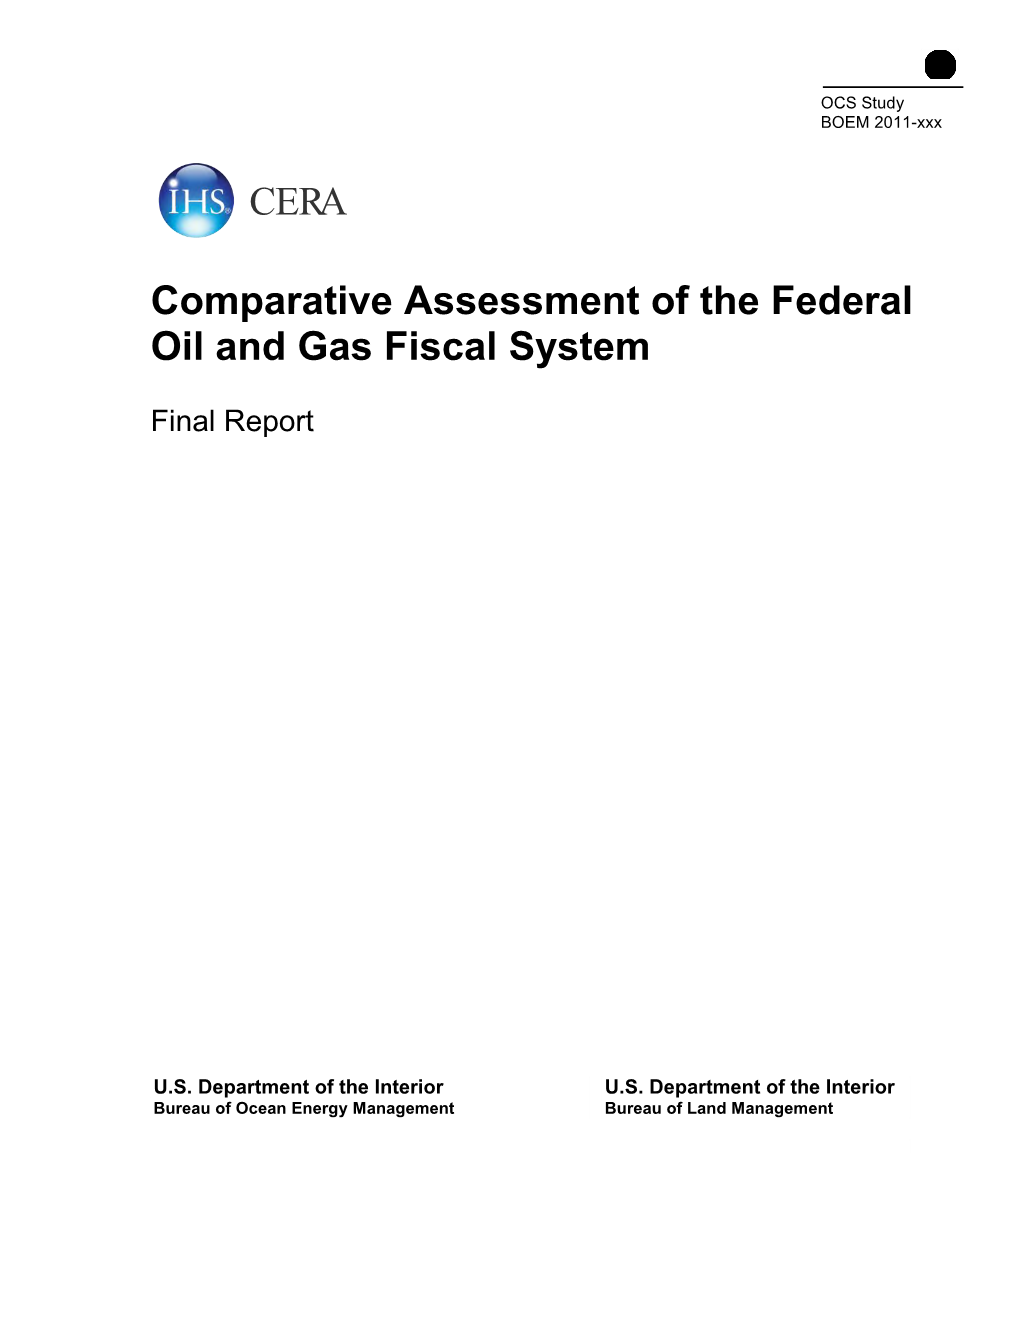 Comparative Assessment of the Federal Oil and Gas Fiscal System